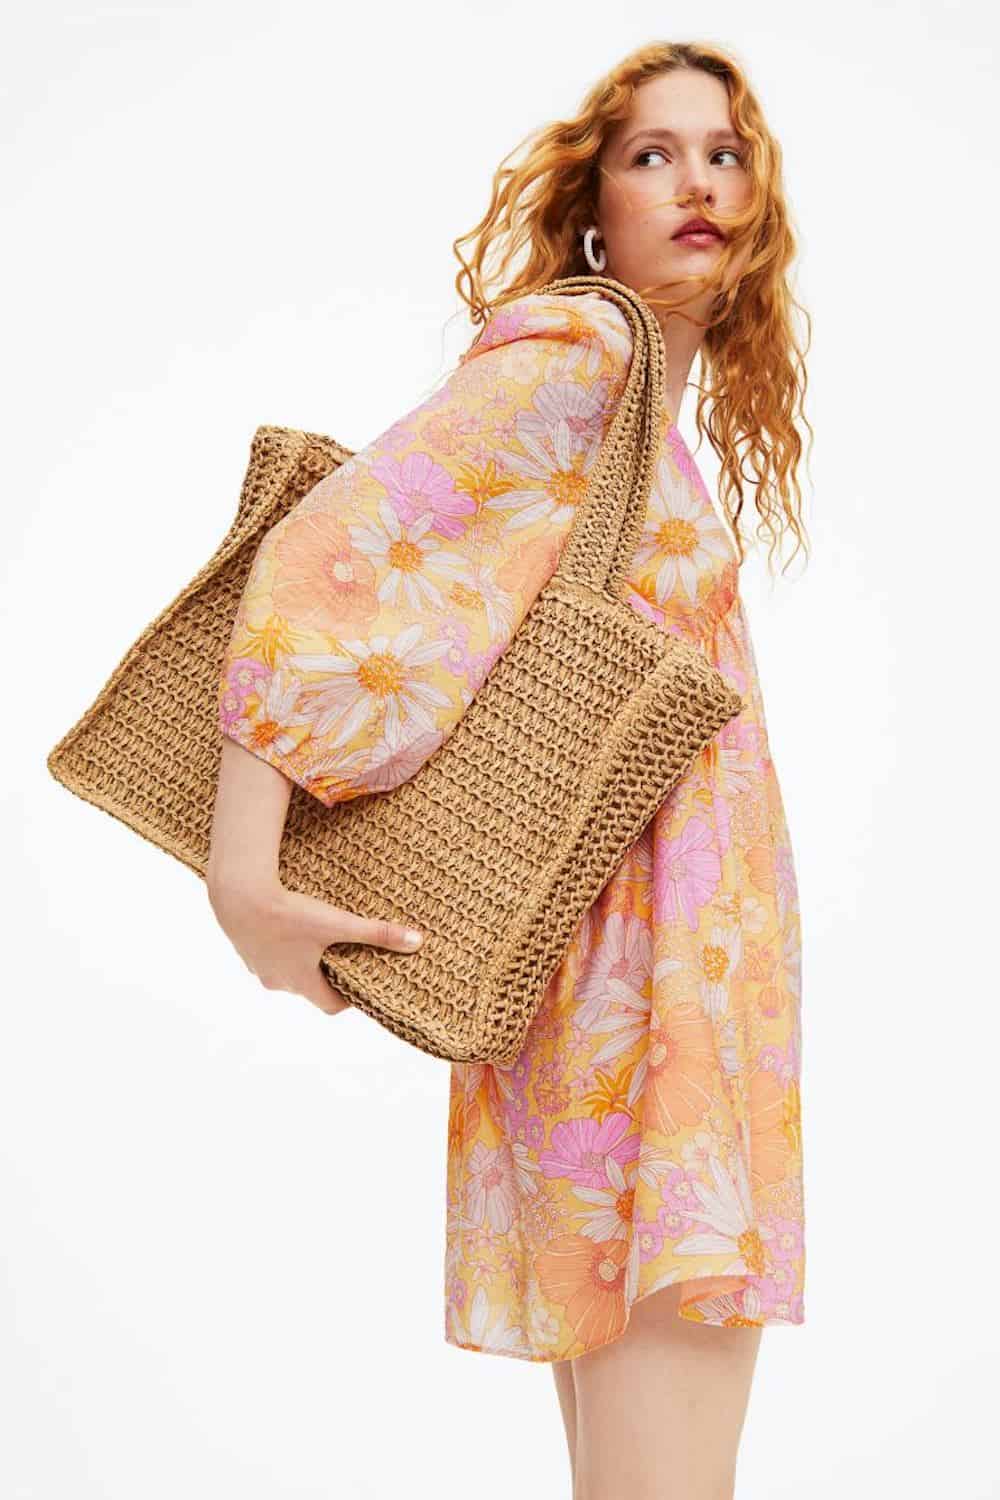 image of a woman in a floral mini dress holding a large woven straw bag